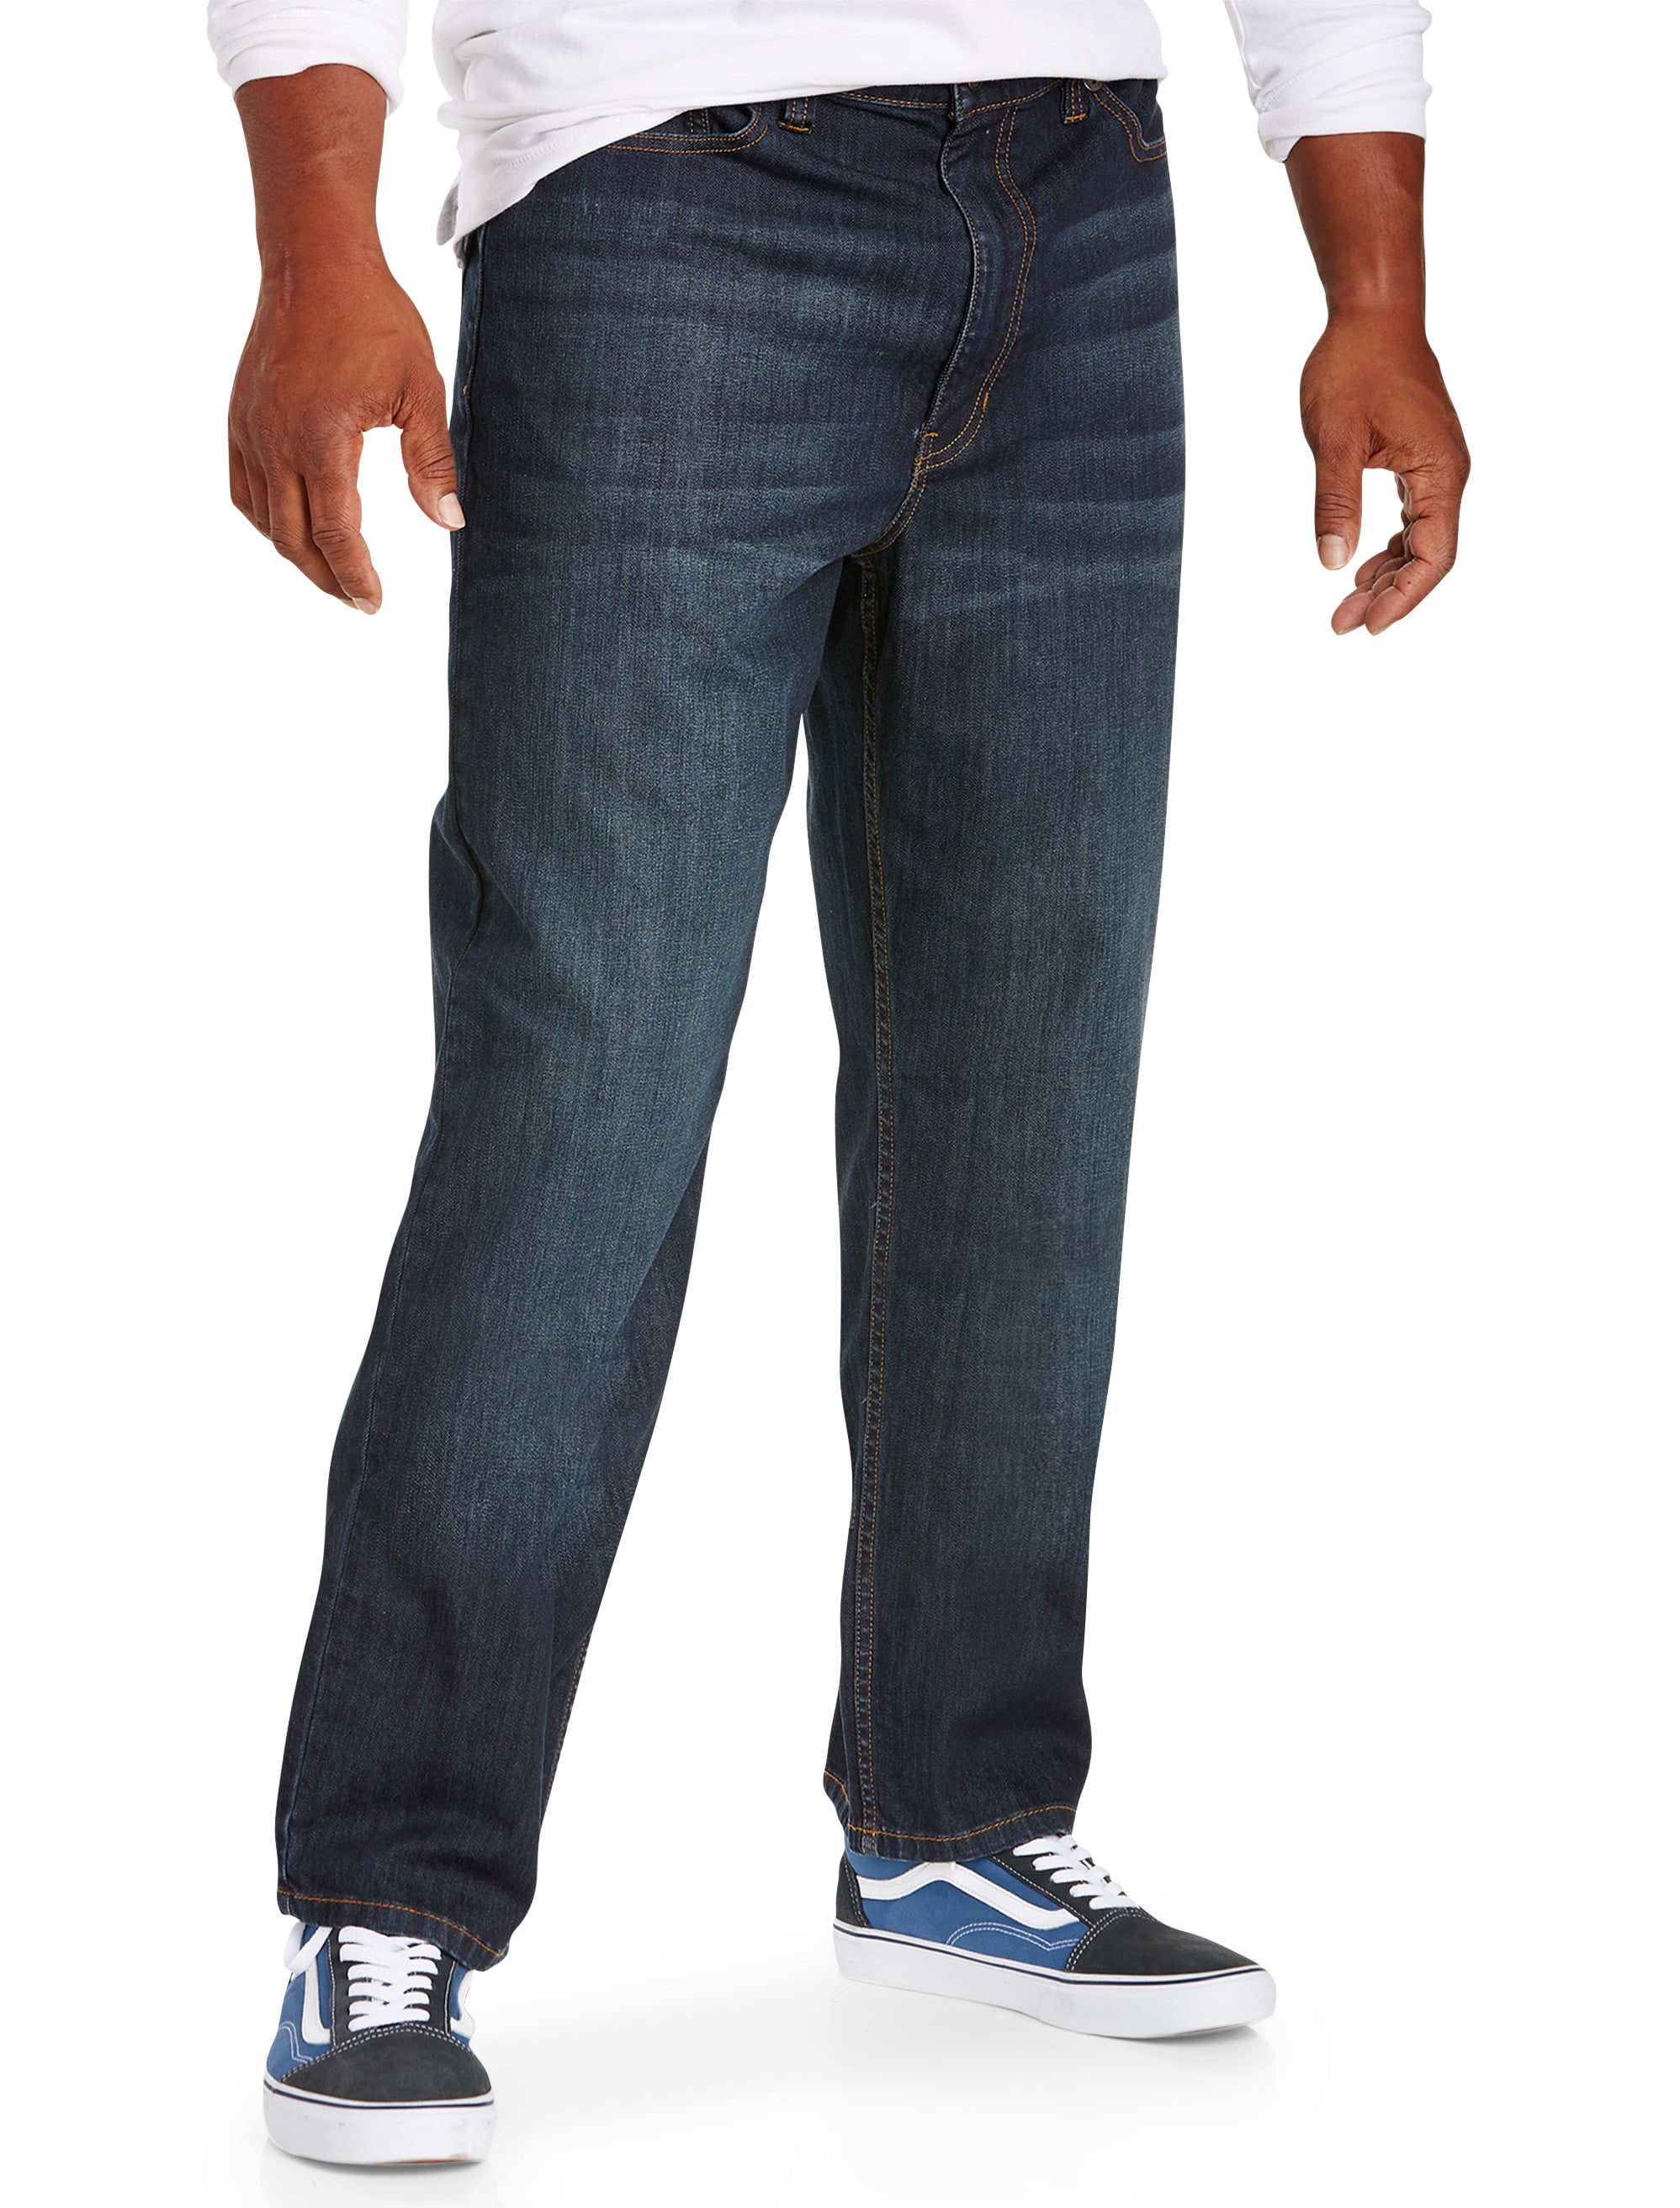 true nation relaxed fit jeans